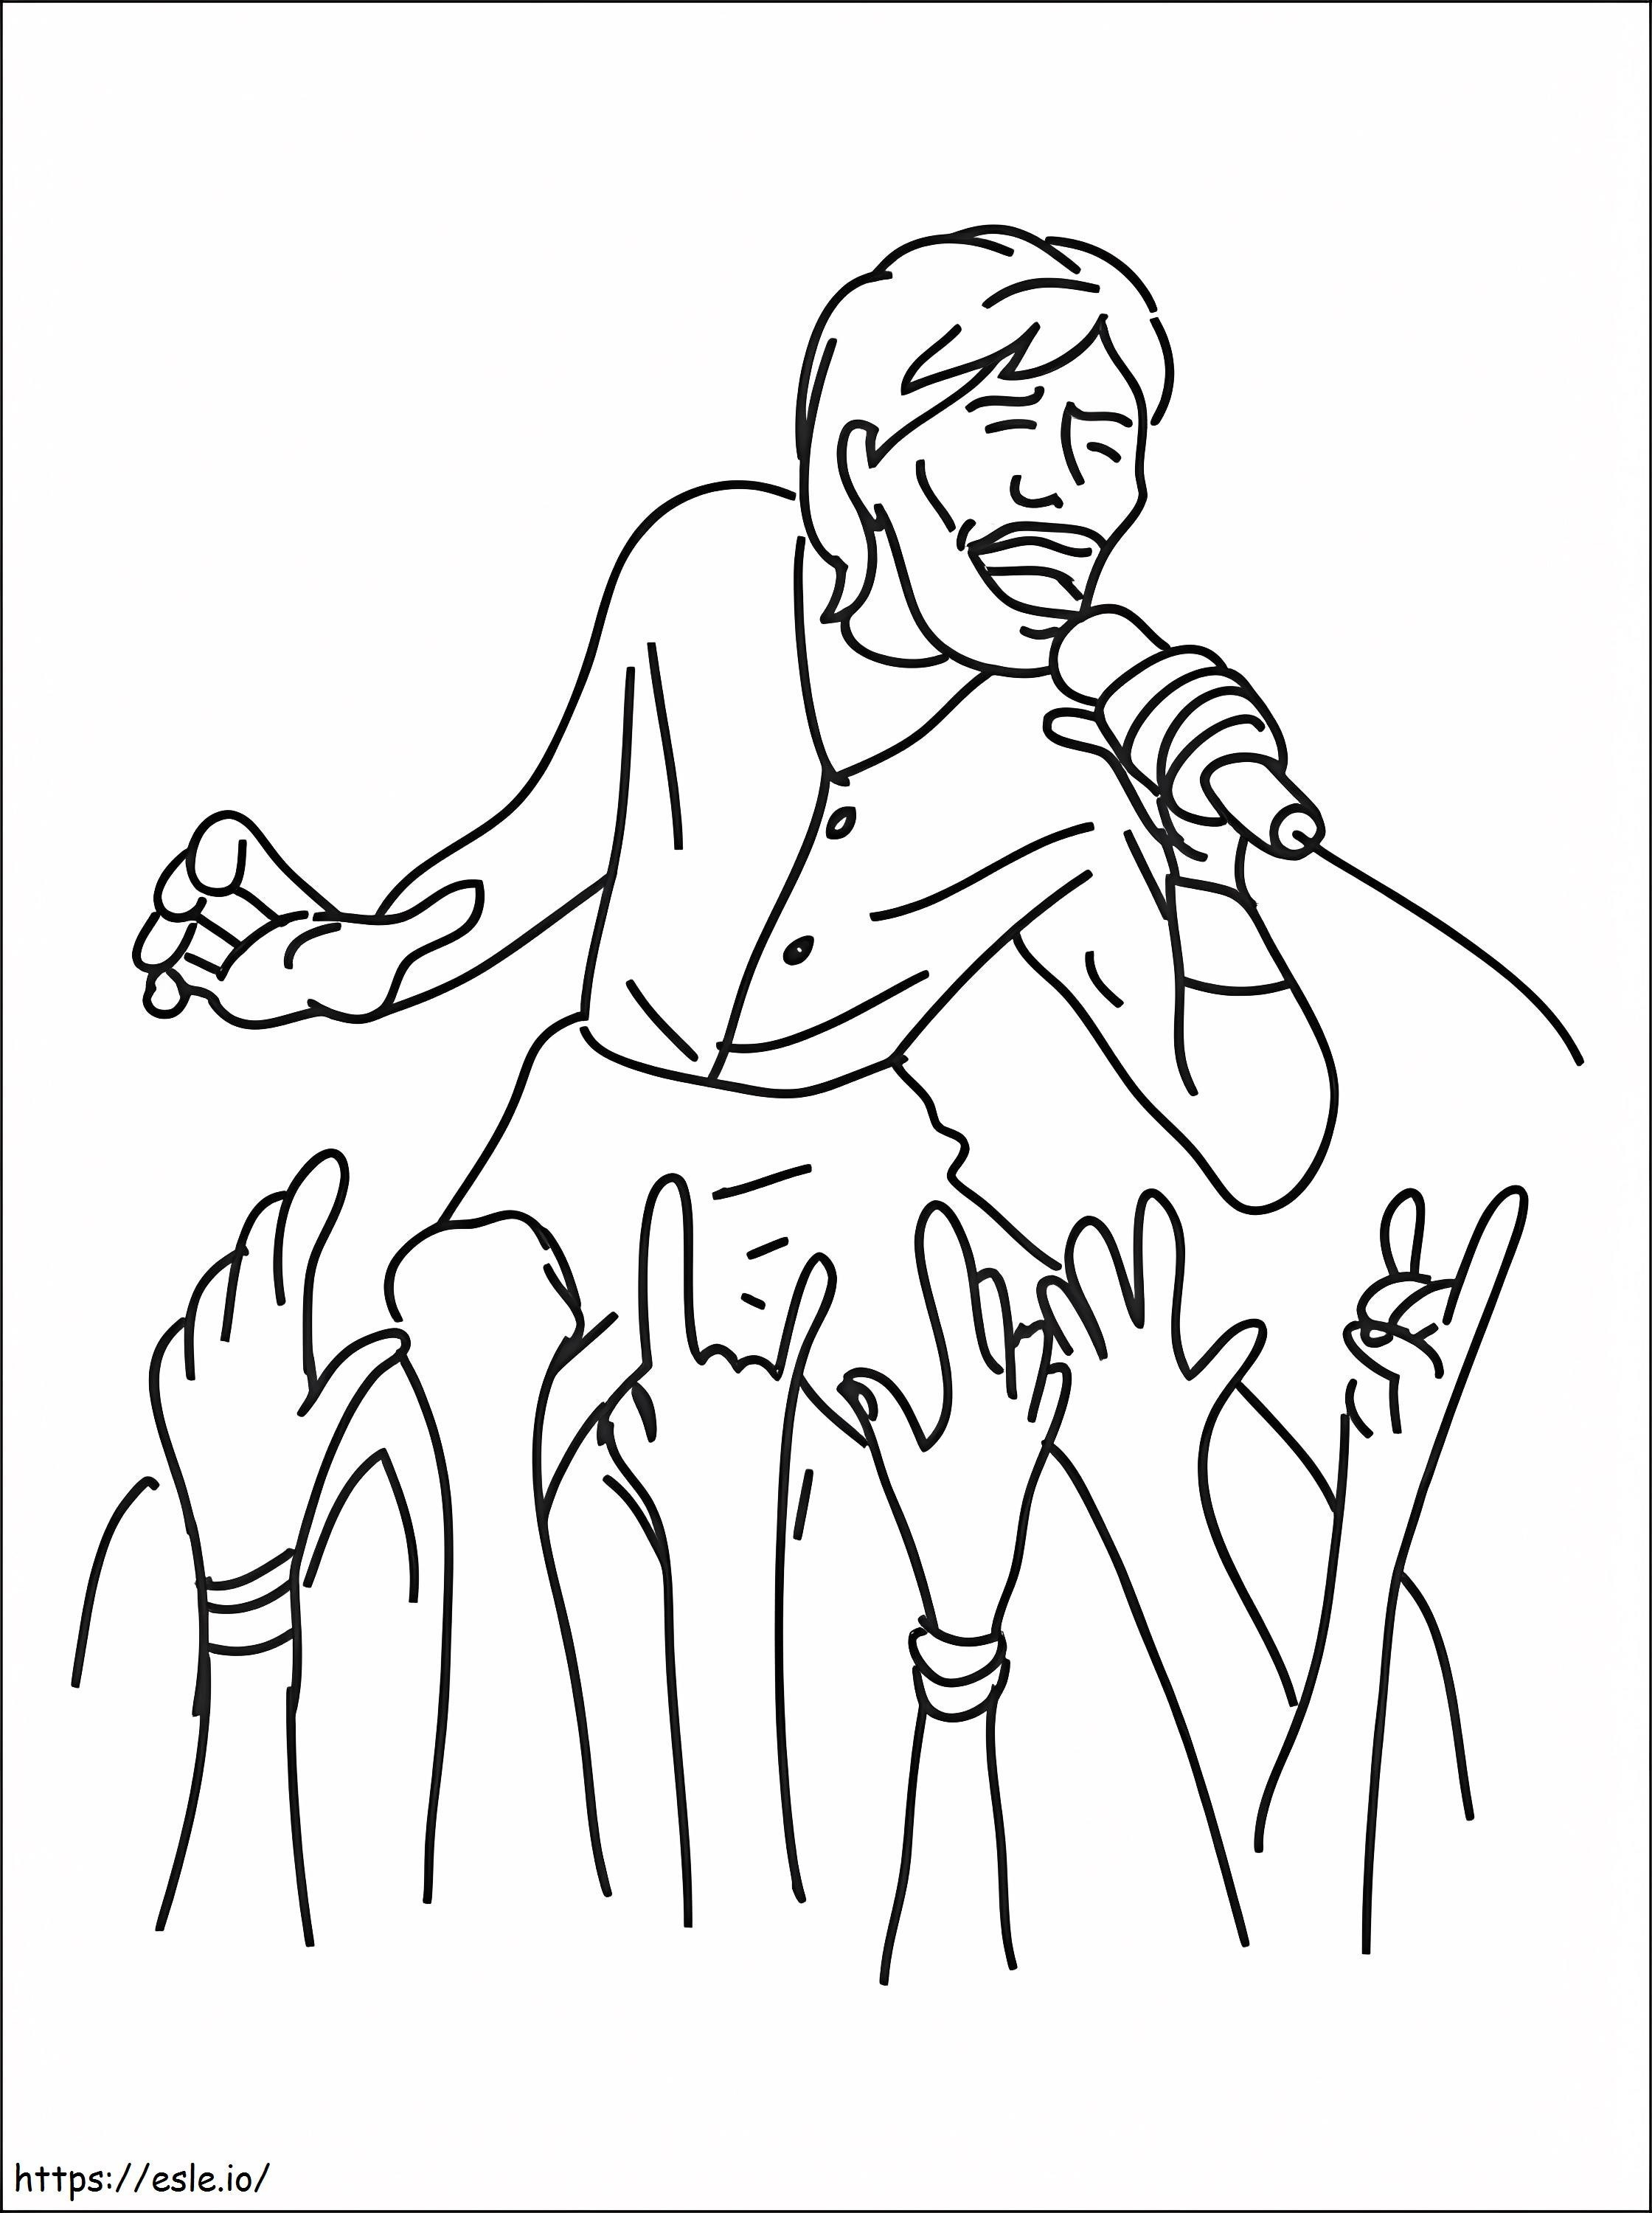 Singer 1 coloring page